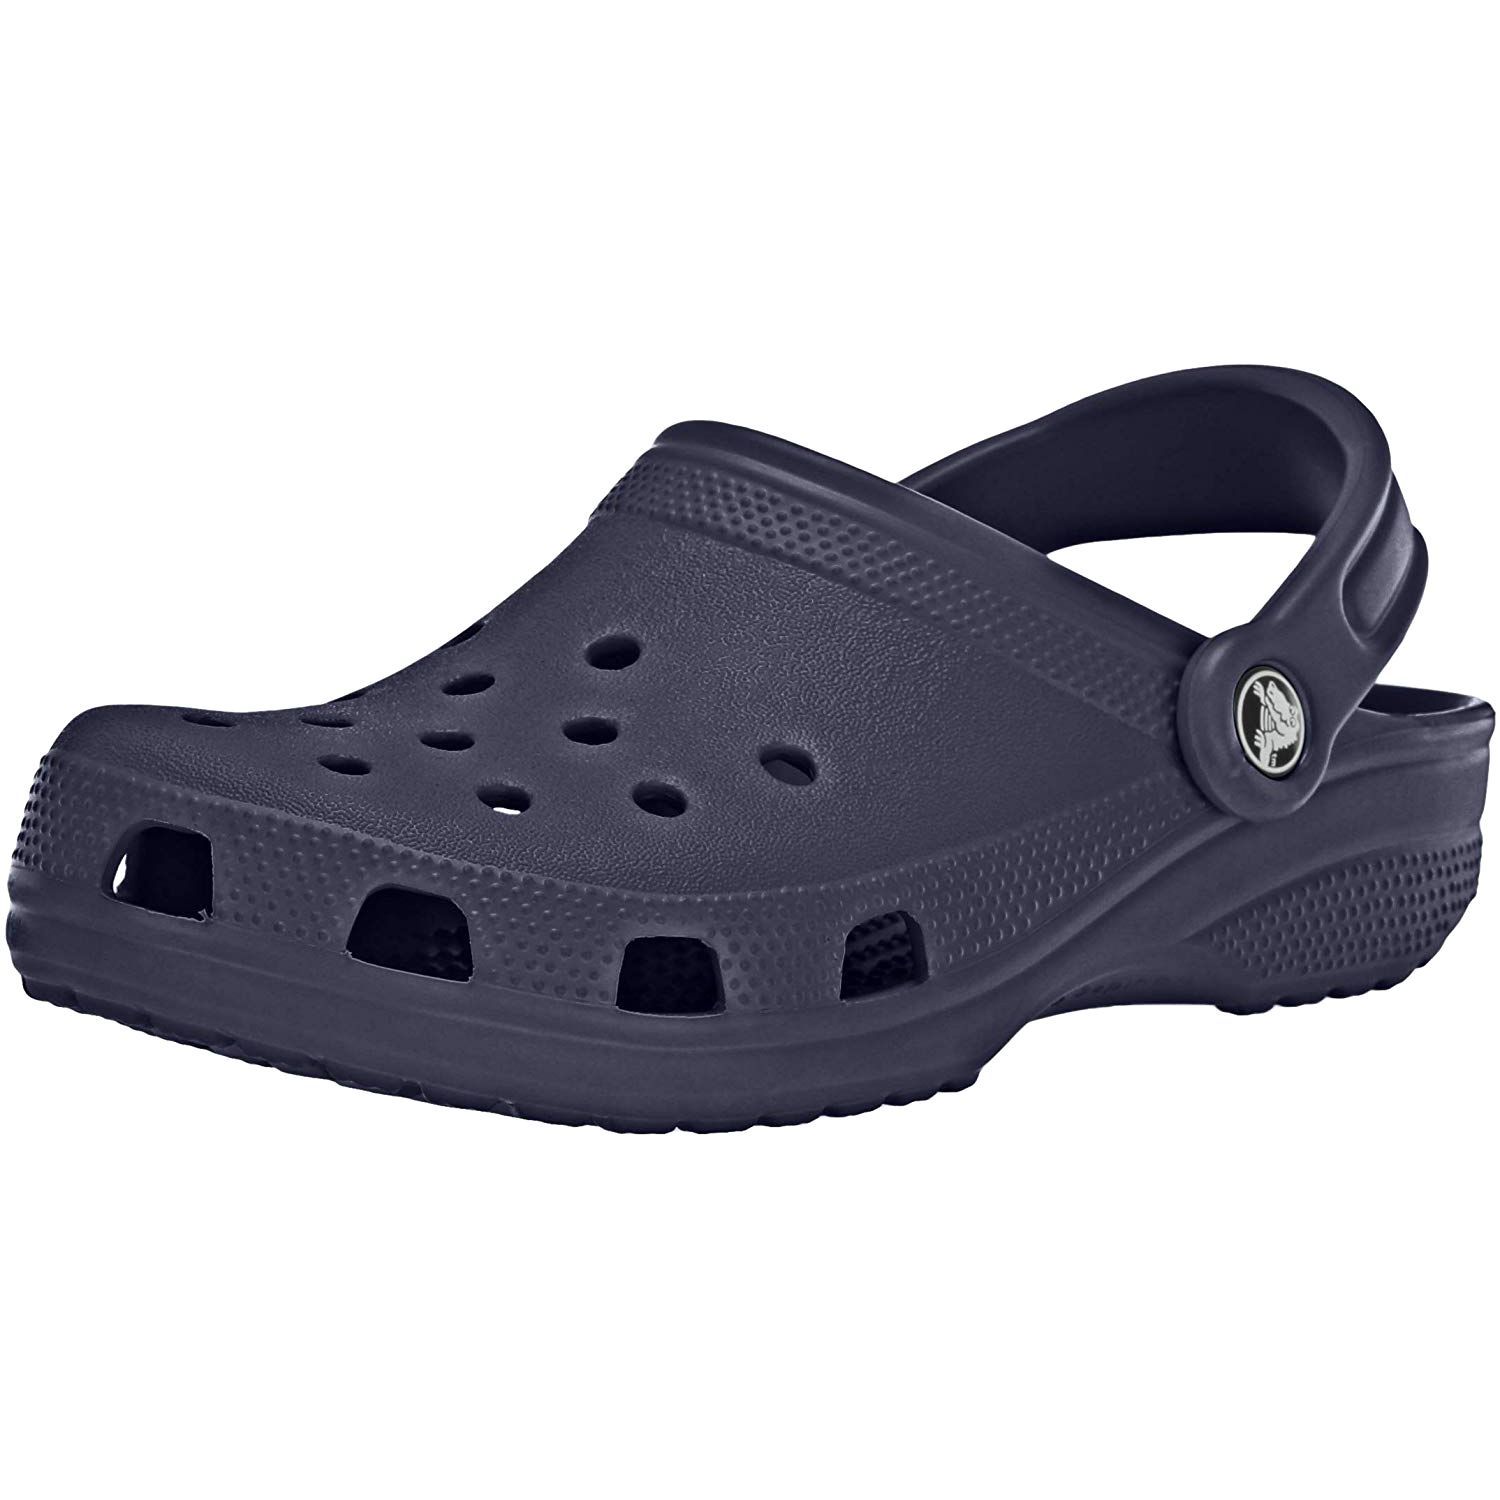 are the crocs on amazon real